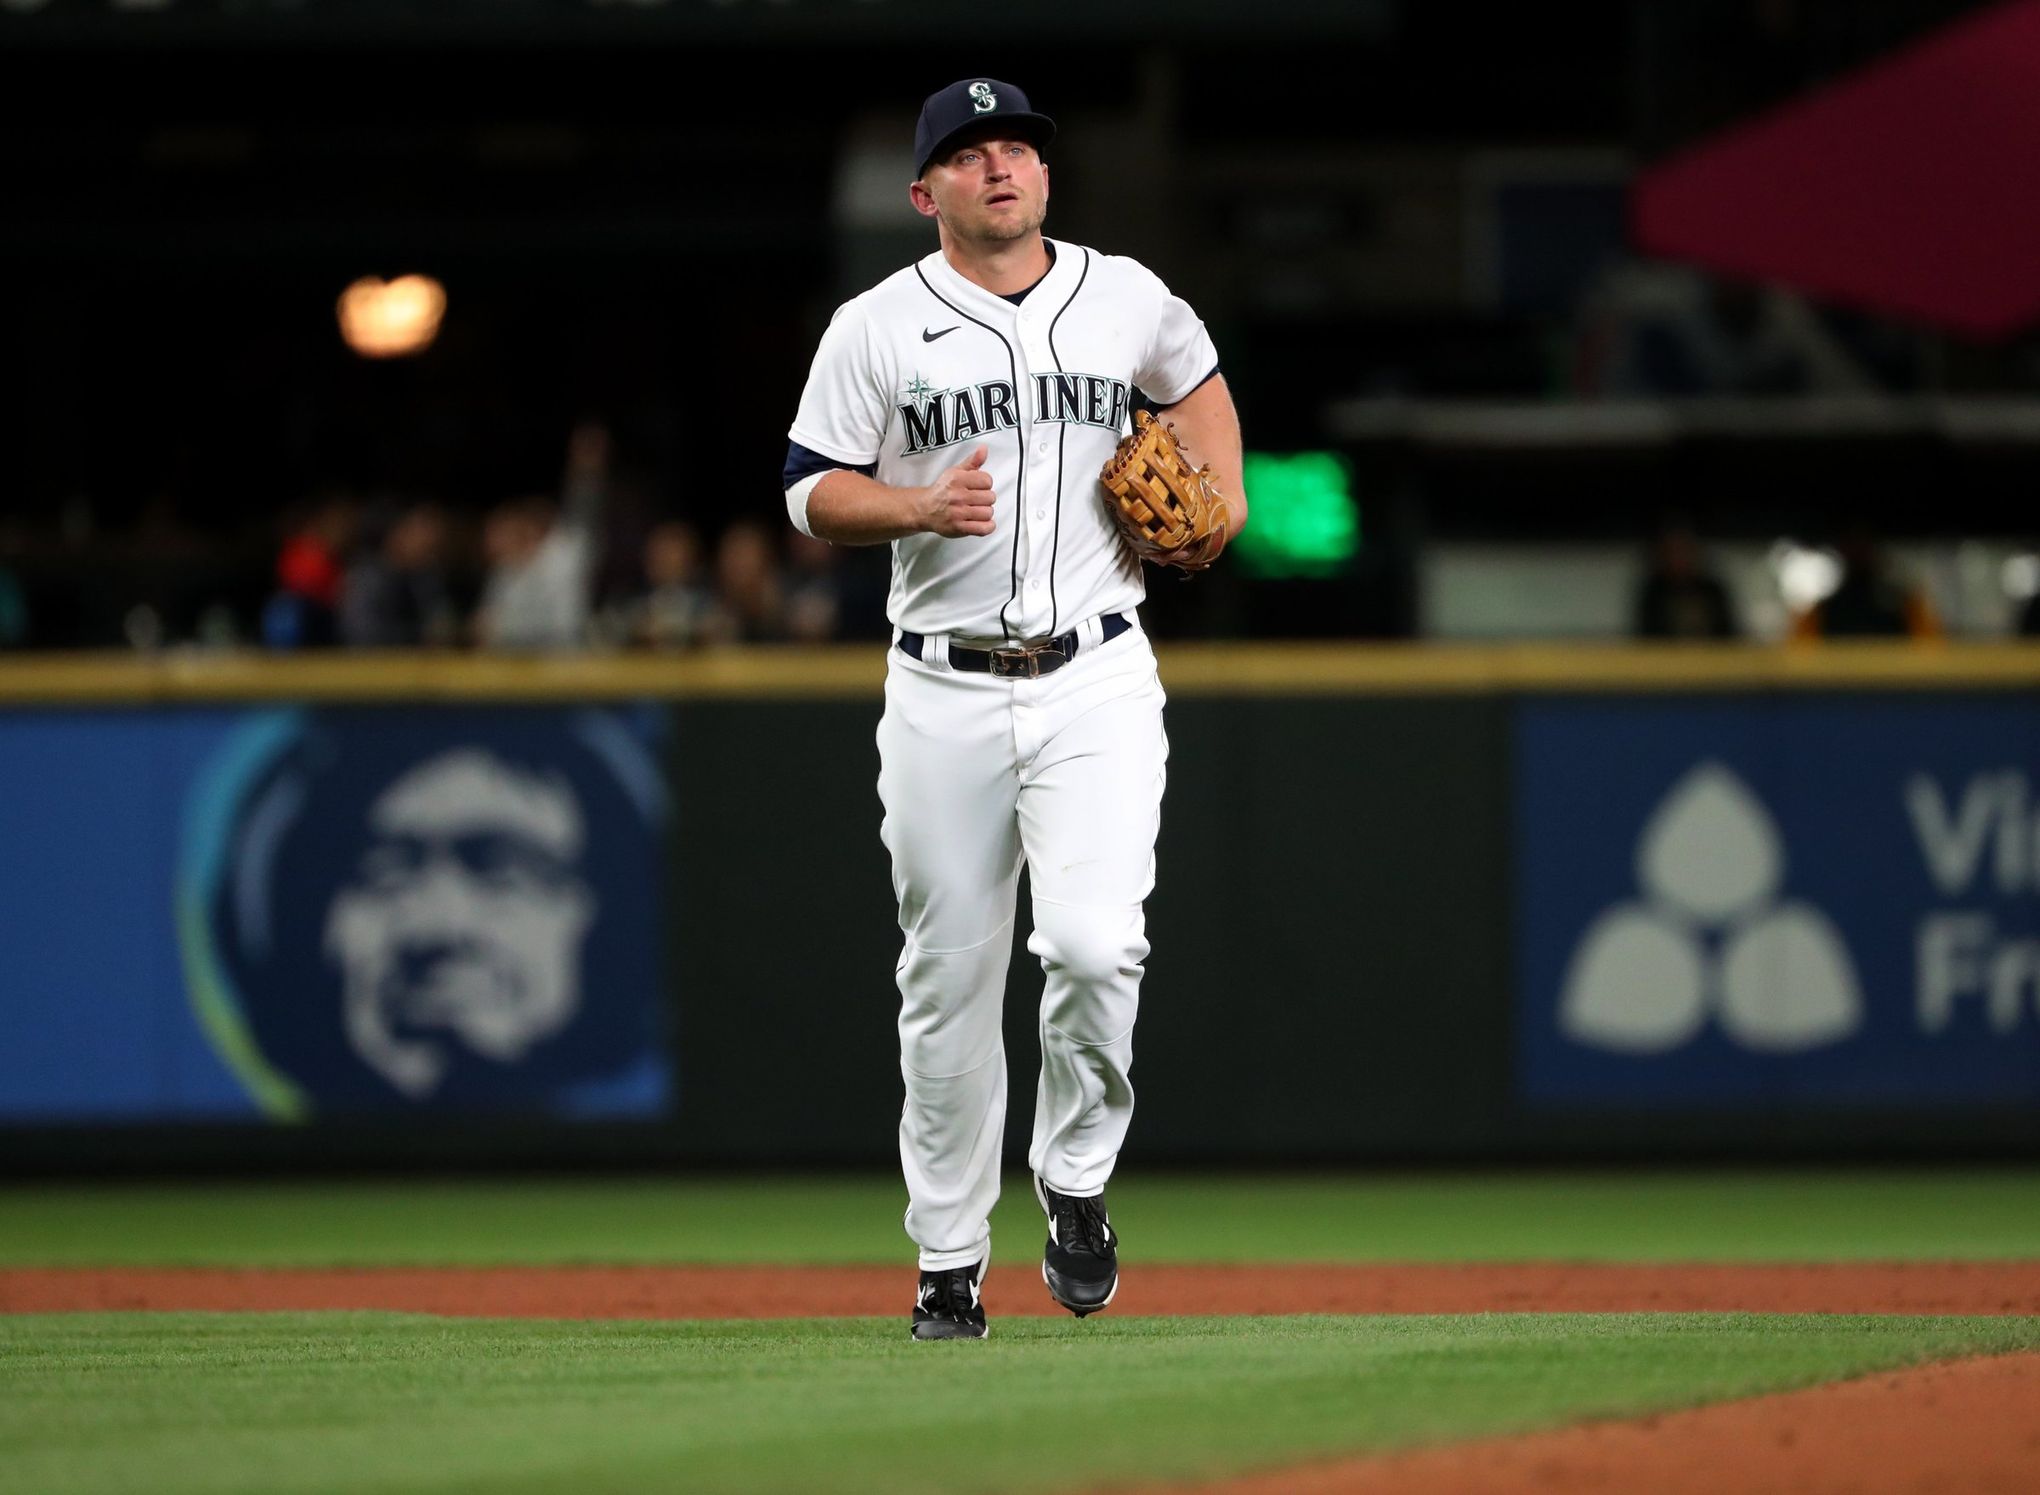 Sources: Kyle Seager nearing $100 million extension with Mariners